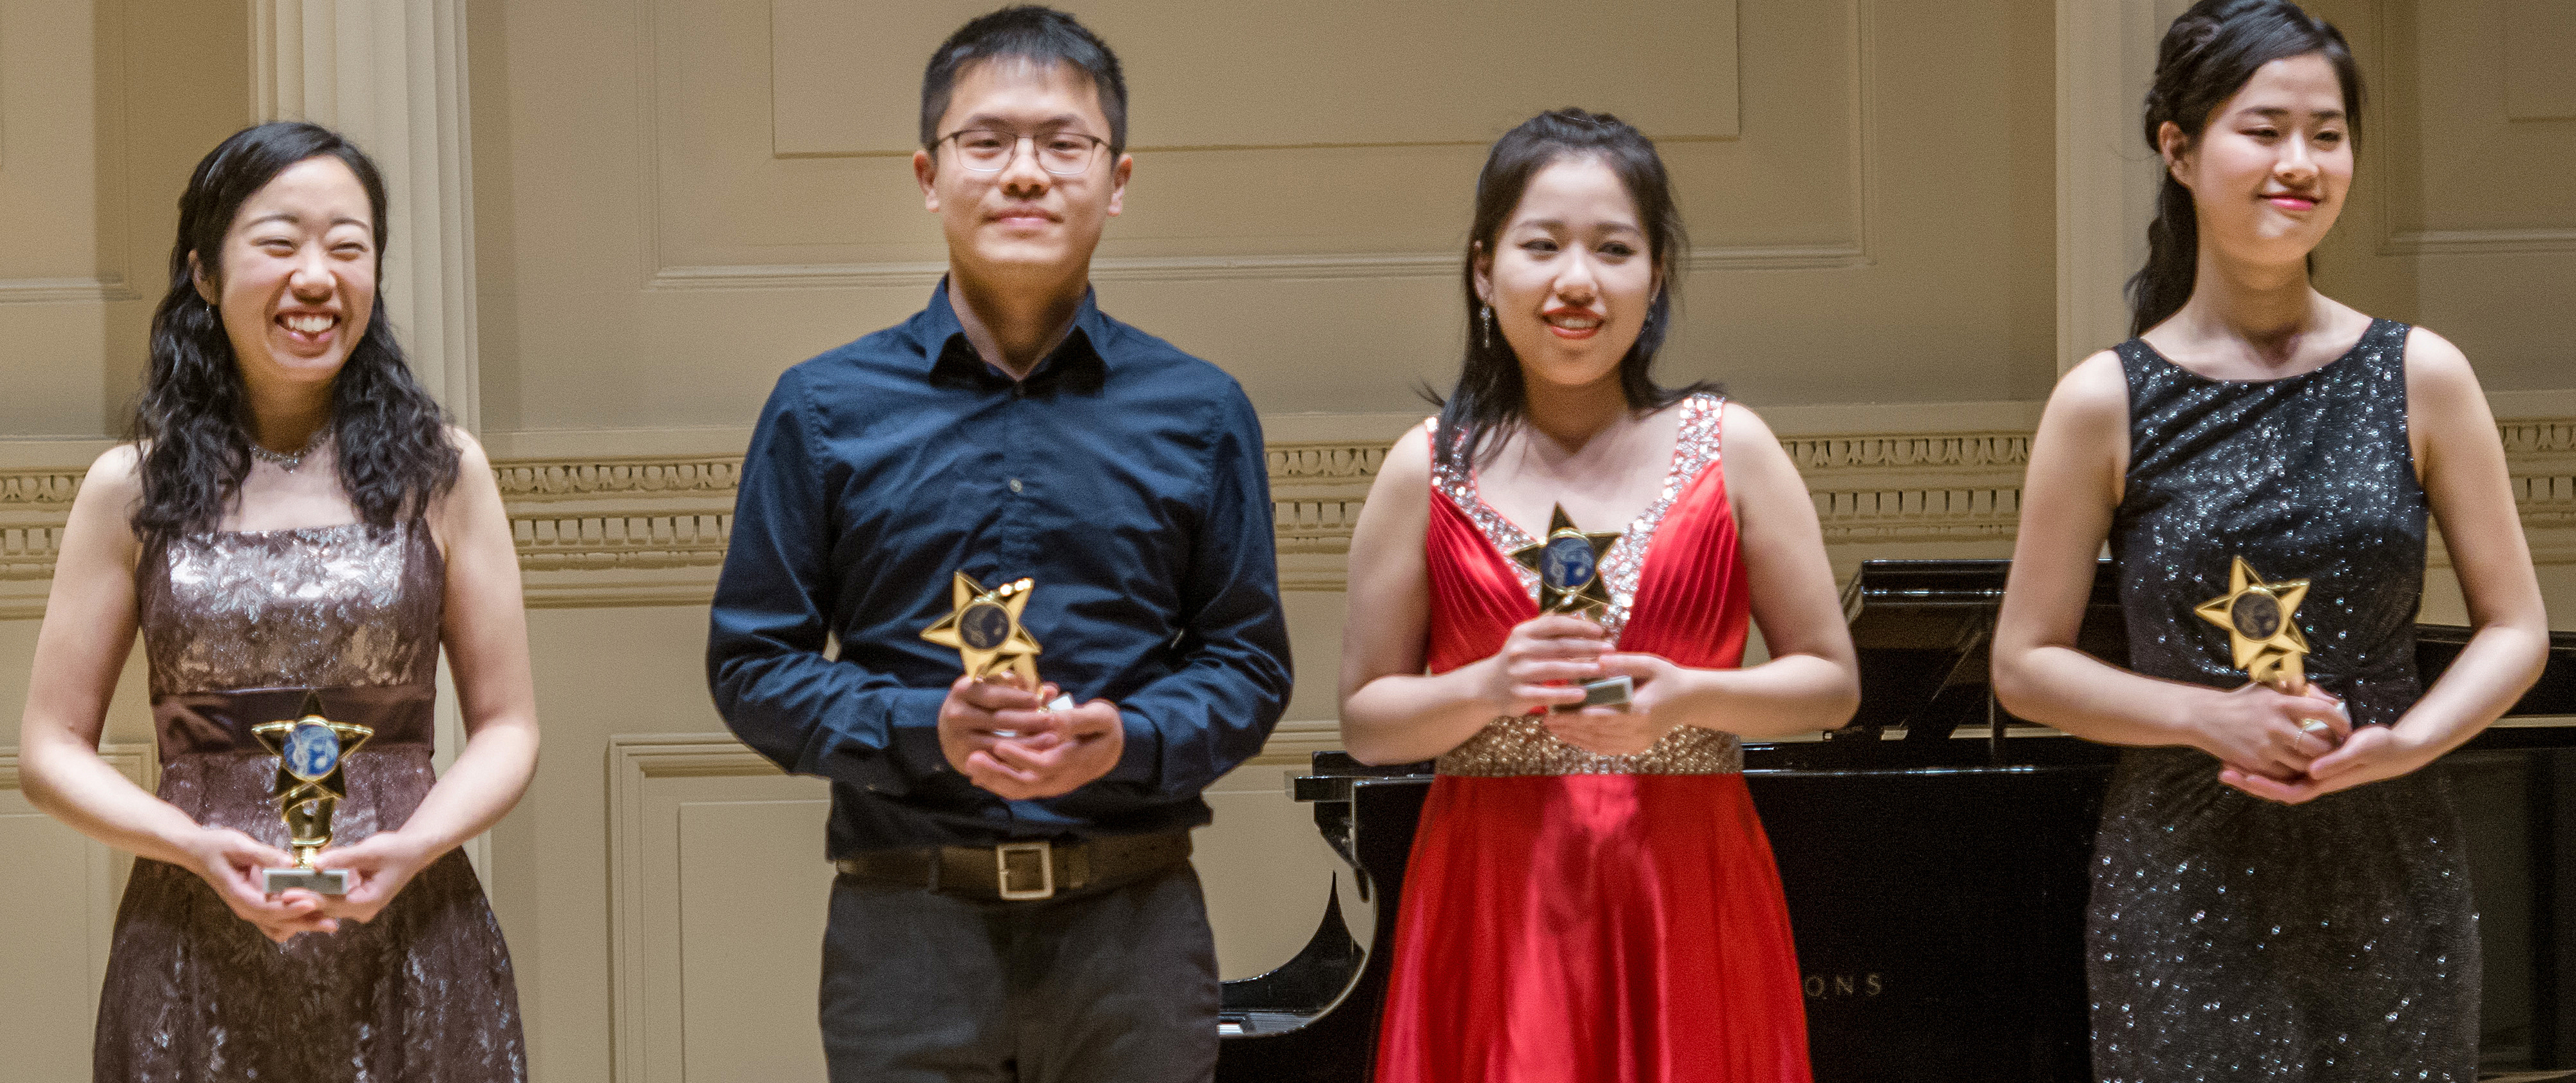 Rondo Young Artist 2017 Presents Rondo Forma Competition First Place Winners’ Recital in Review